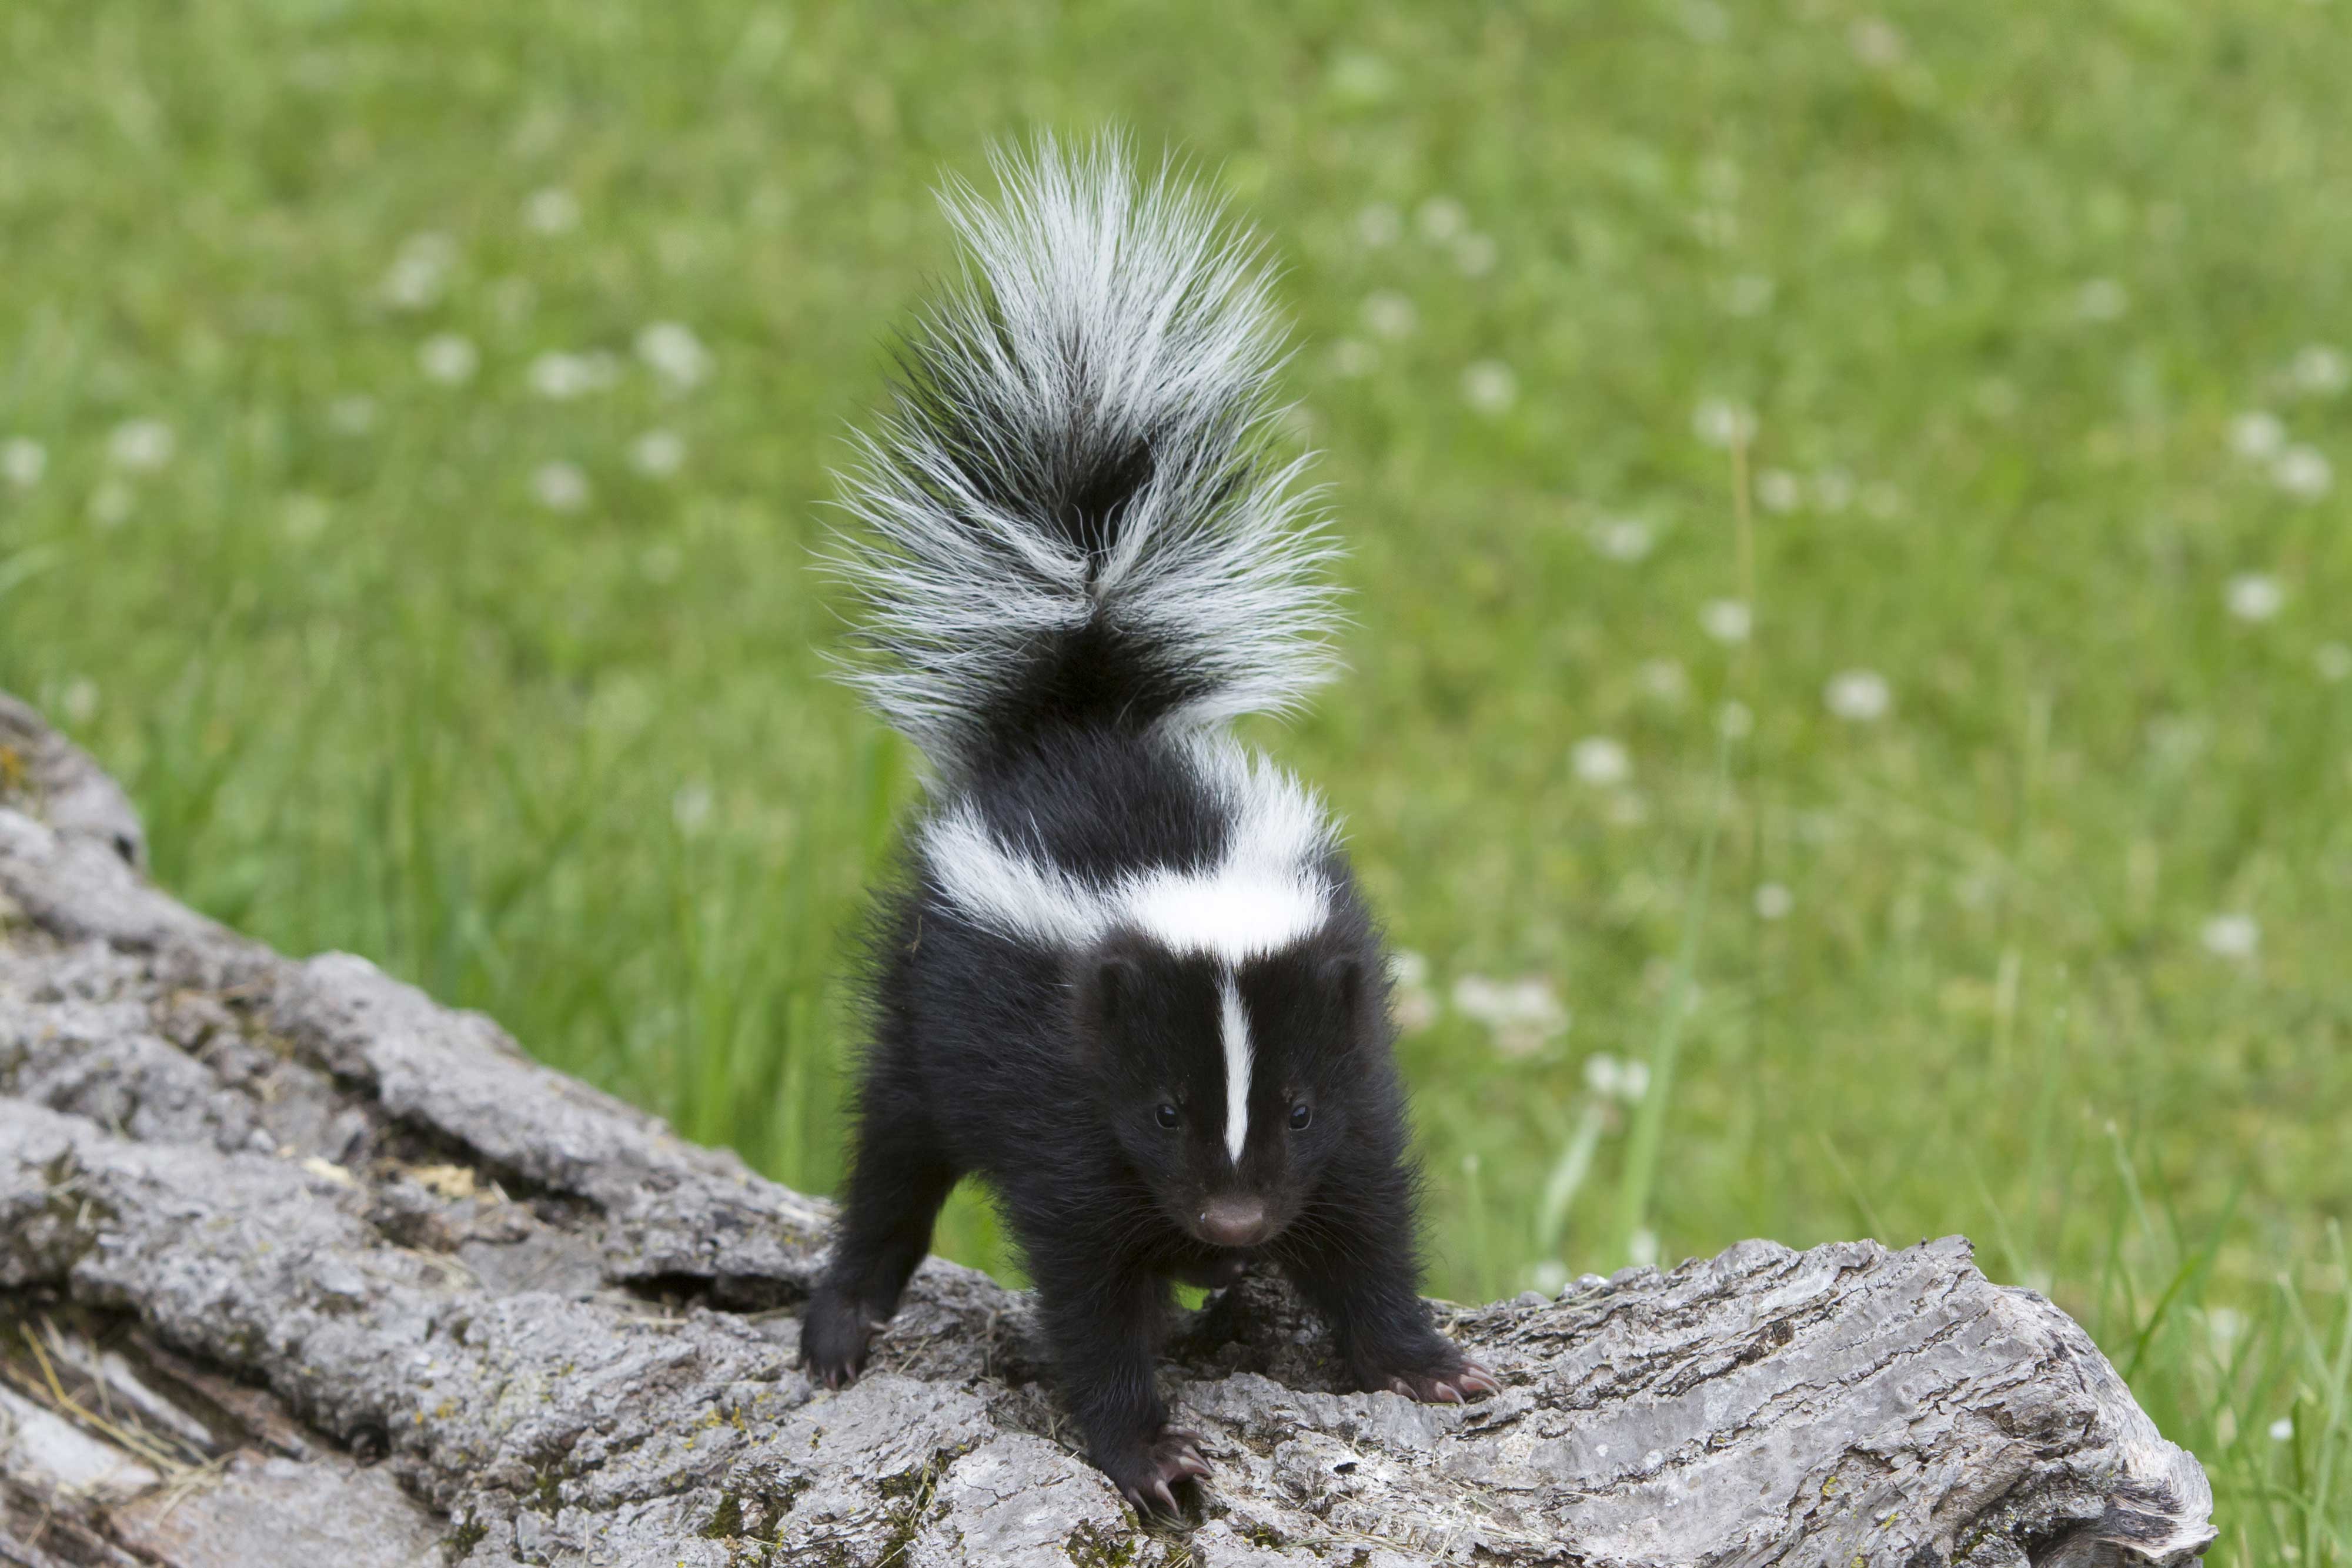 A skunk with its tail up.